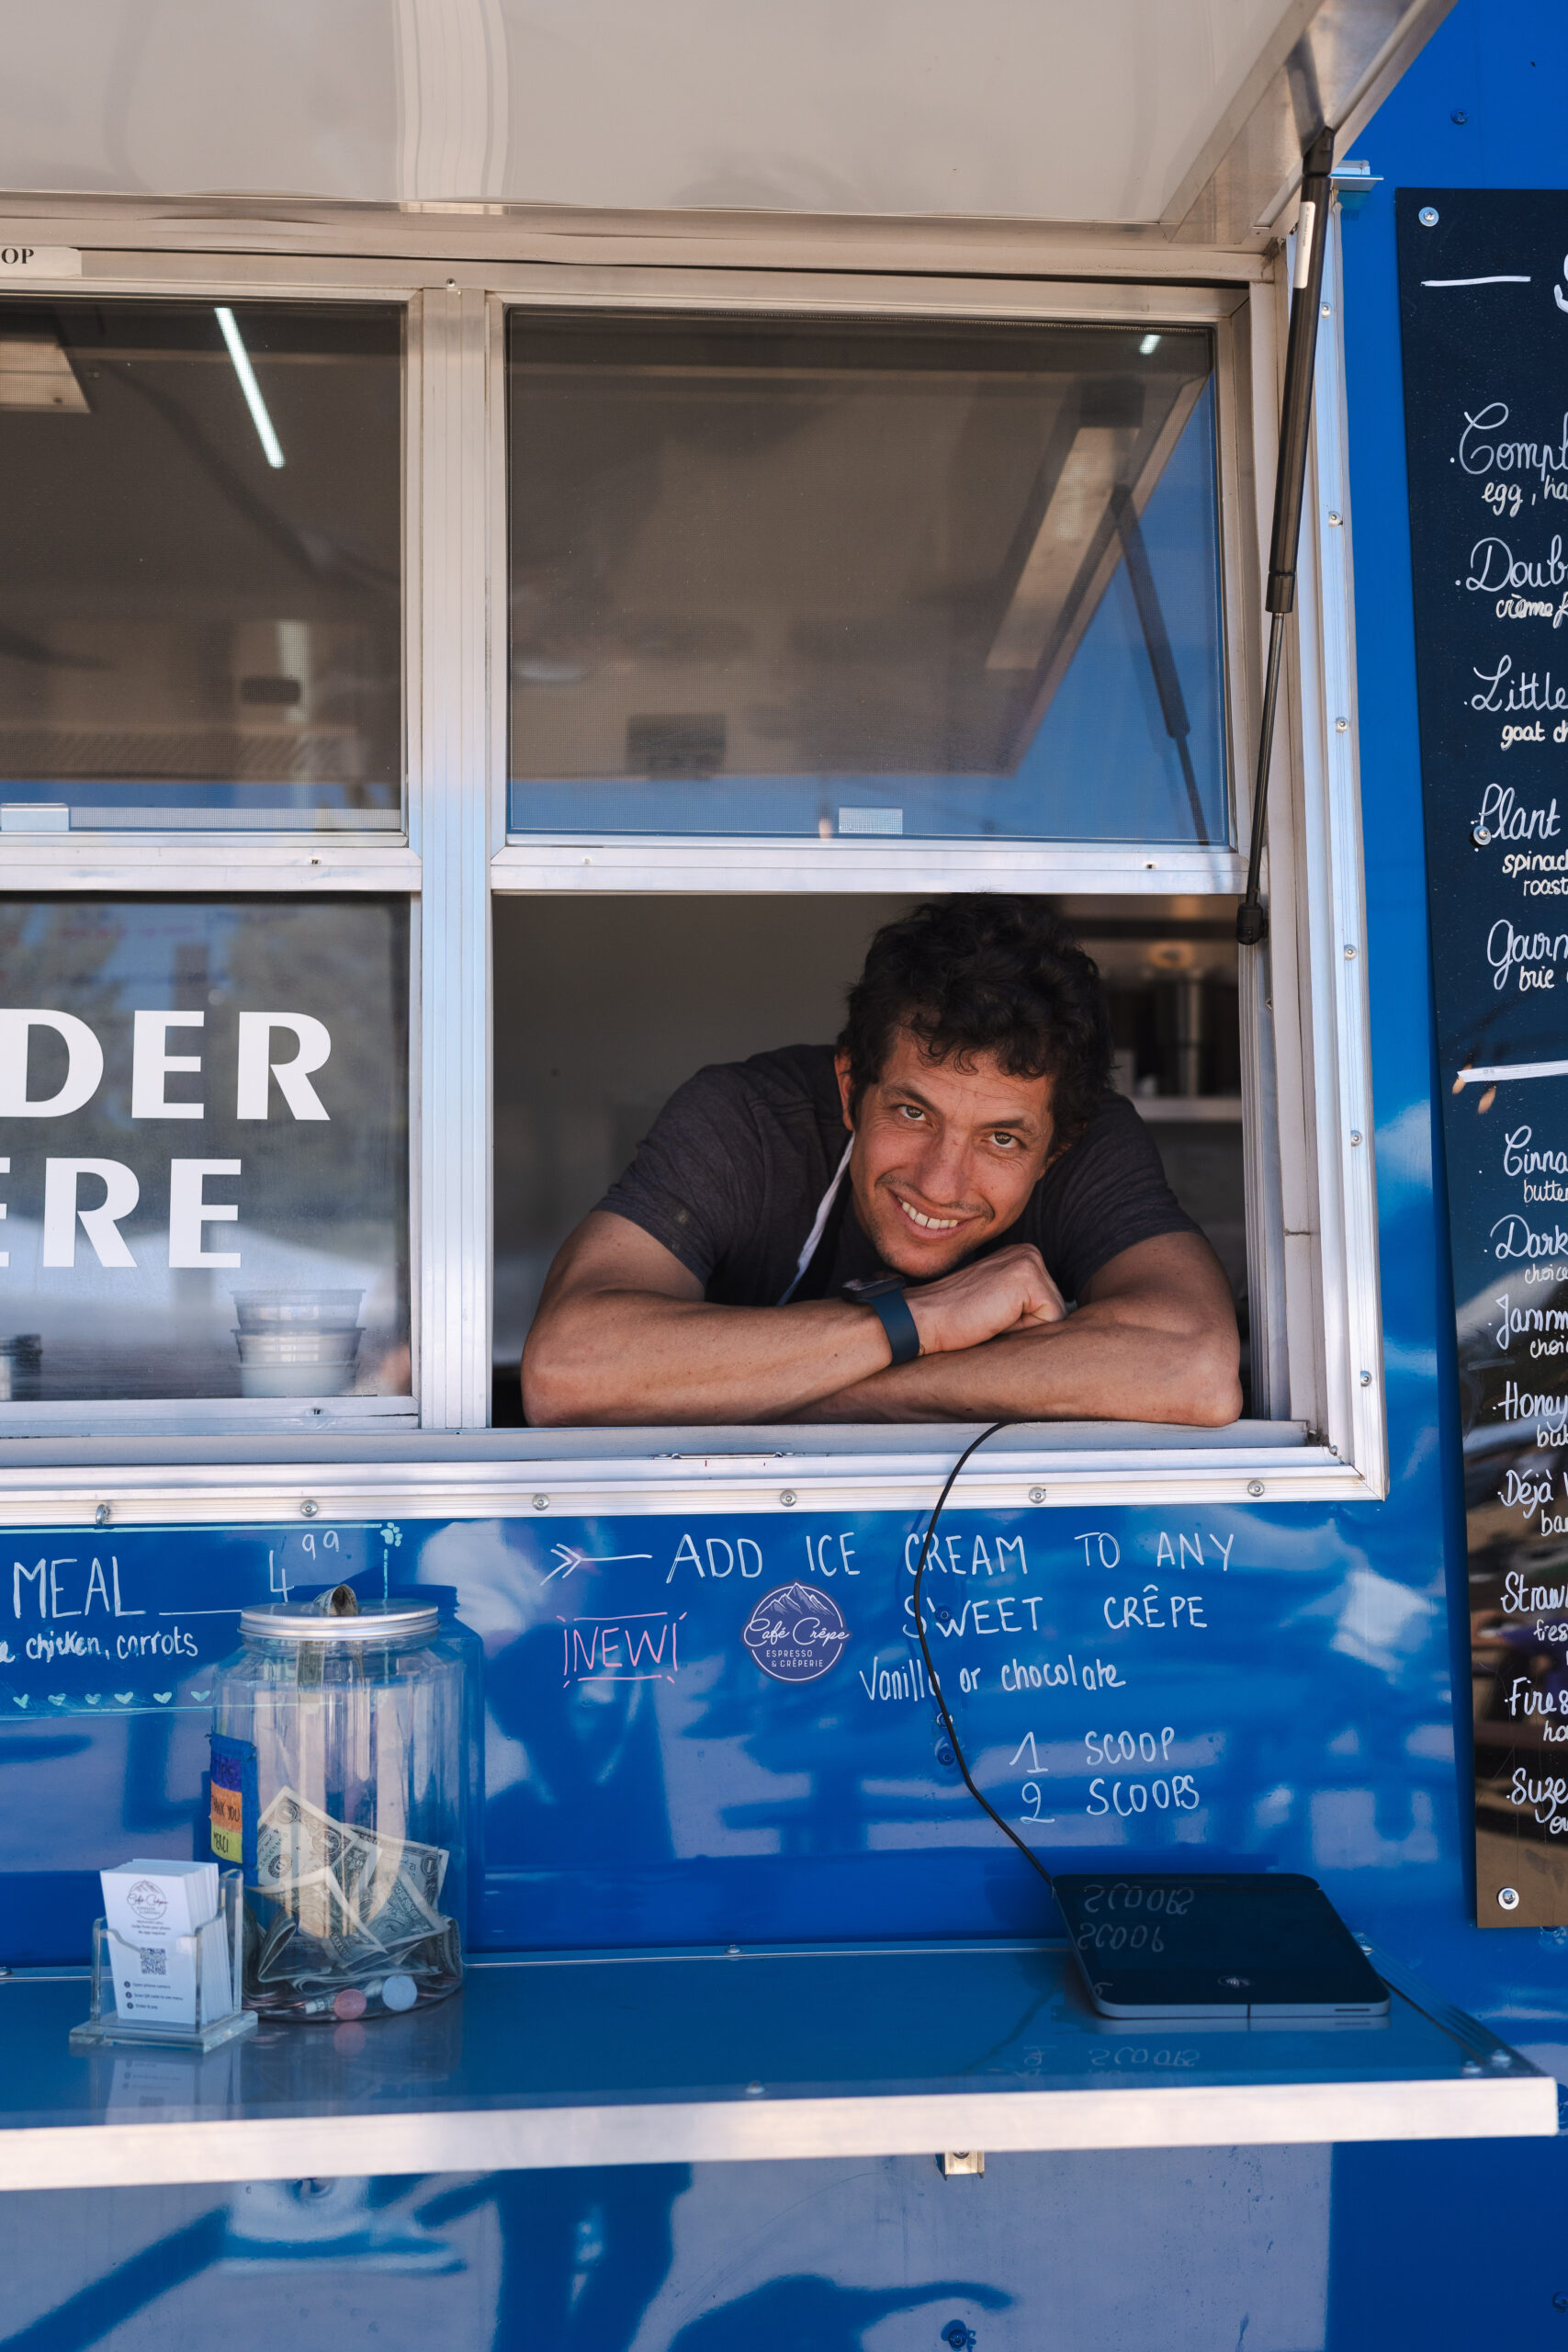 A man at the food truck window awaits his customer with a welcoming smile.